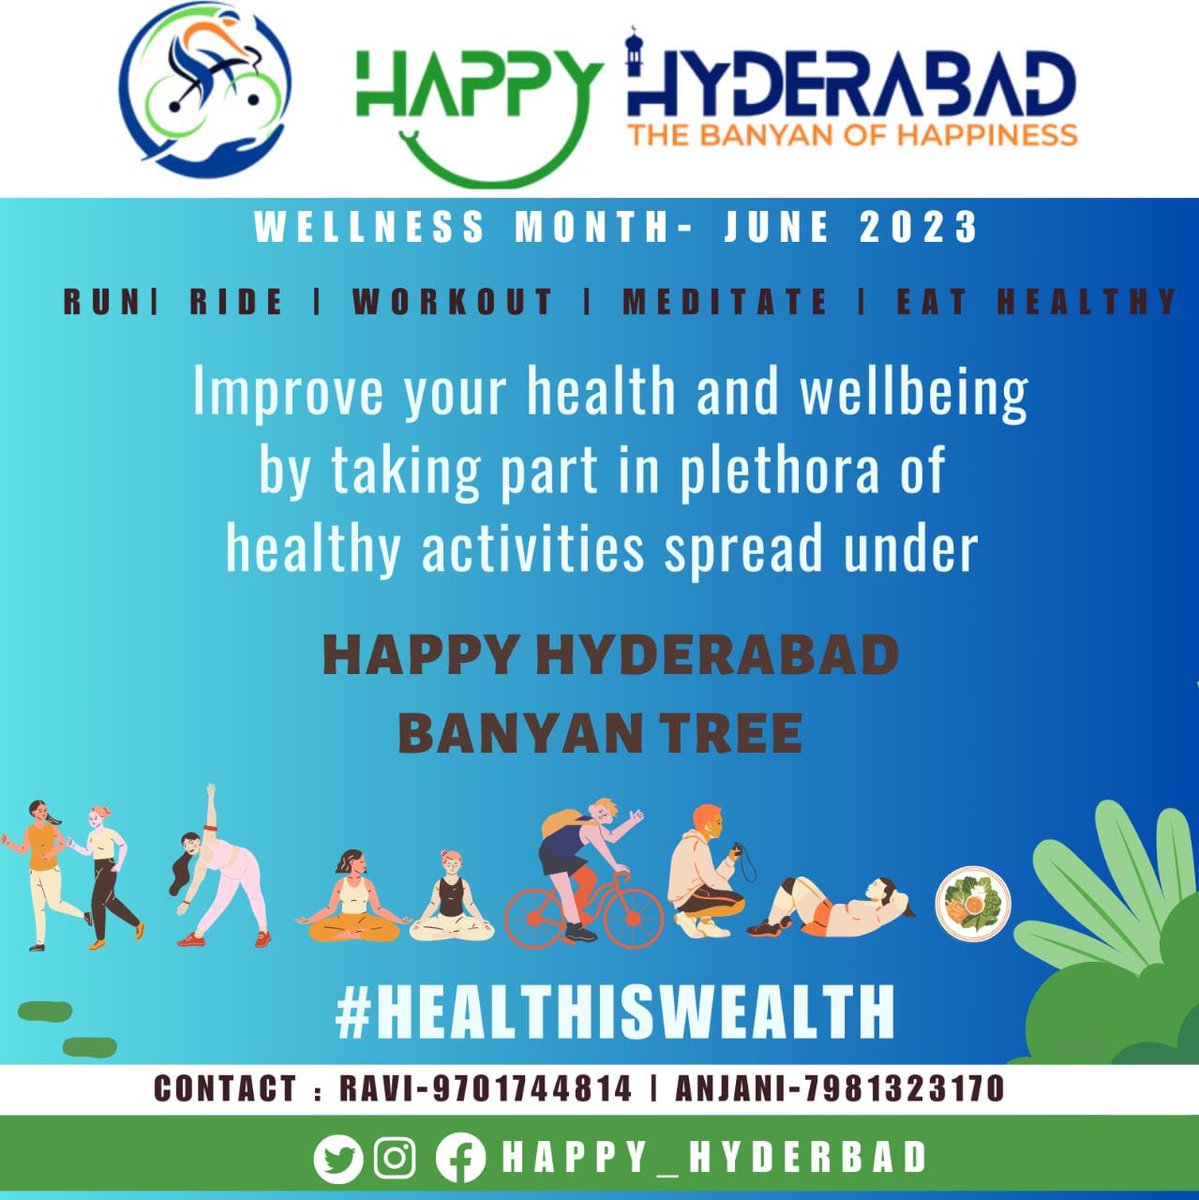 🏃🚶🚴‍♂️🏍️🥗🍲🏍️ 🚴‍♀️🚶🏻‍♀️
We are happy to announce
#HAPPYHYDERABADWELLBEING  JUNE 2023

PURPOSE: To Improve our community's health and wellbeing by taking part in a plethora of healthy activities spread under Happy Hyderabad BANYAN
 
#HyderabadCyclingRevolution 
#HappeningHyderabad